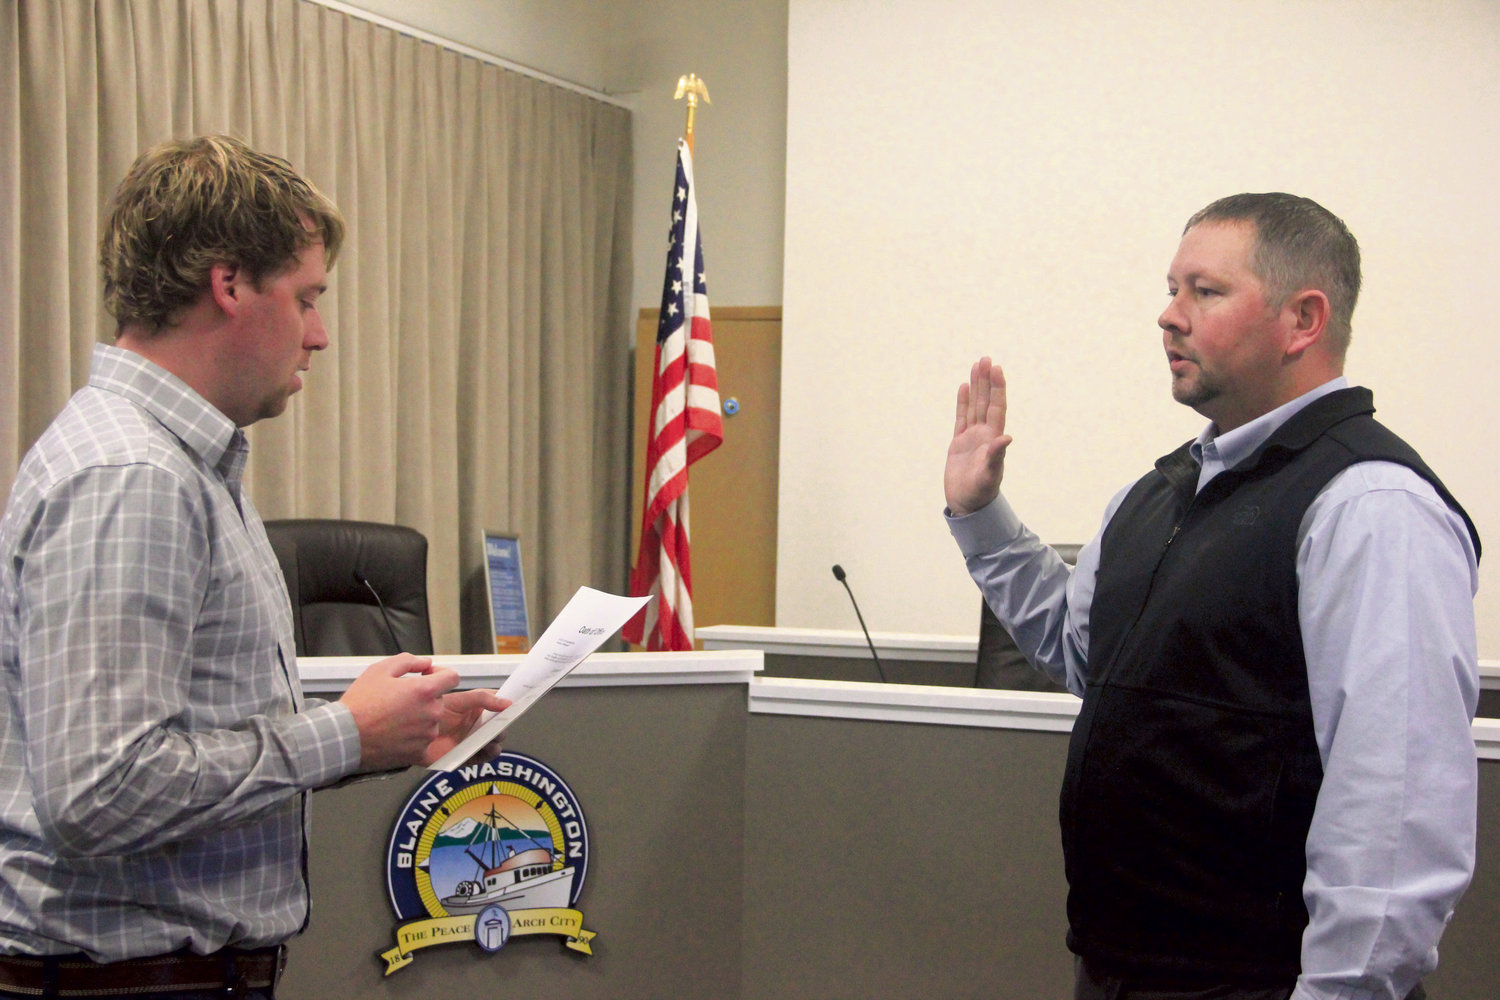 Deputy city manager Sam Crawford, l., swears in Michael Harmon as Blaine city manager in council chambers before he started his first day on the job January 17. Harmon previously worked as a chief operating officer of an electric utility provider in Wyoming and former city administrator in Spearfish, South Dakota.